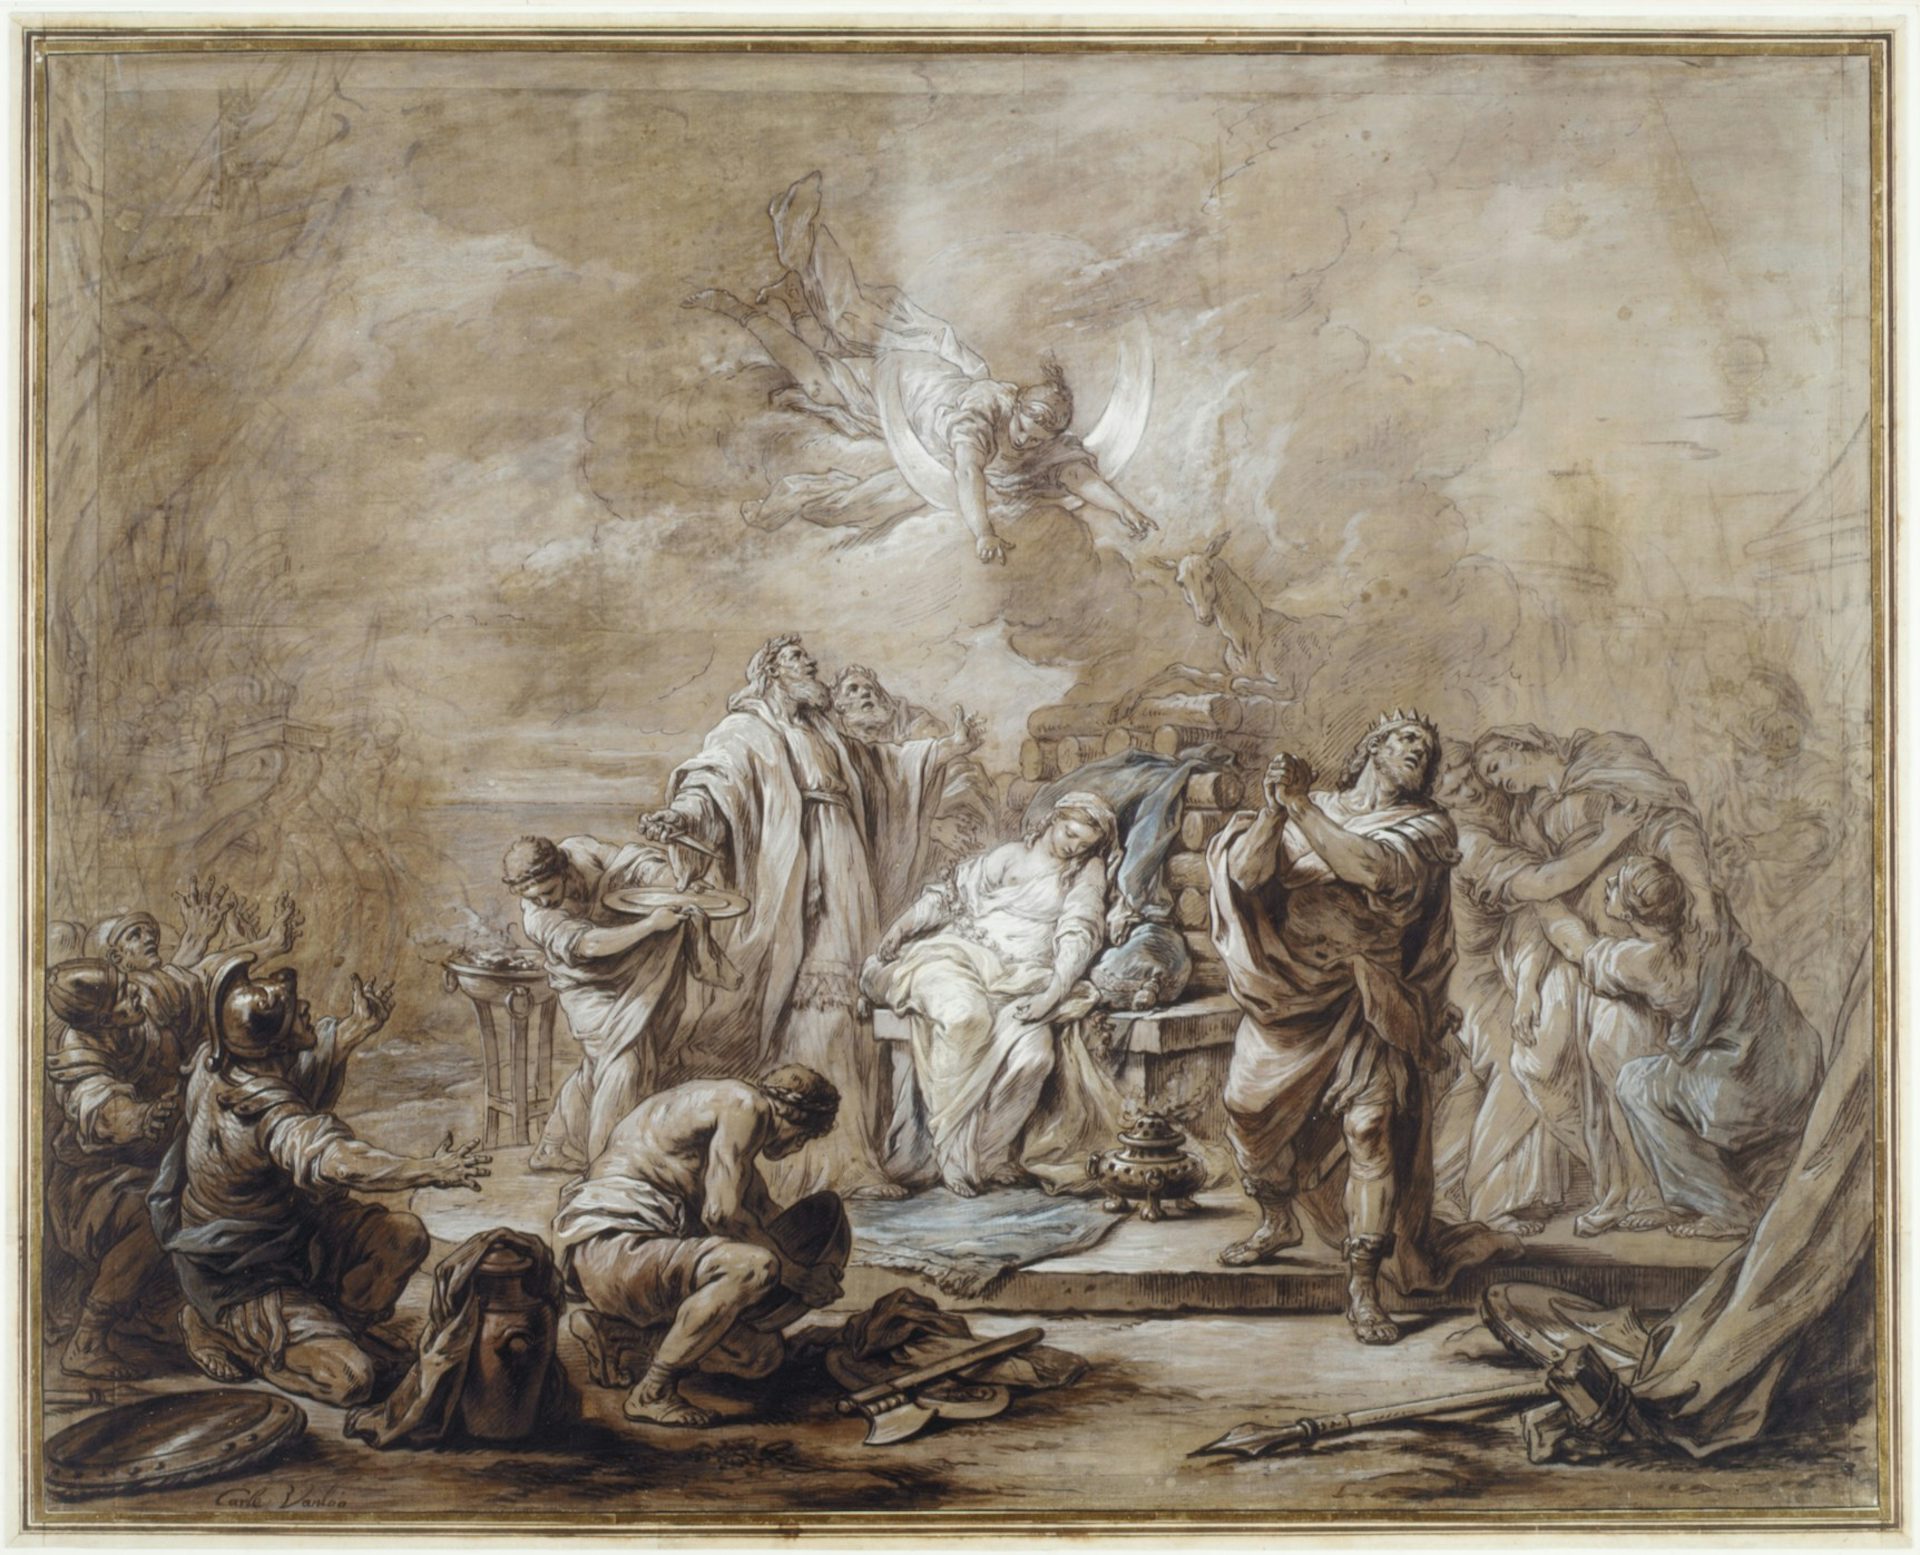 The Sacrifice of Iphigenia by Carle (Charles André) Vanloo